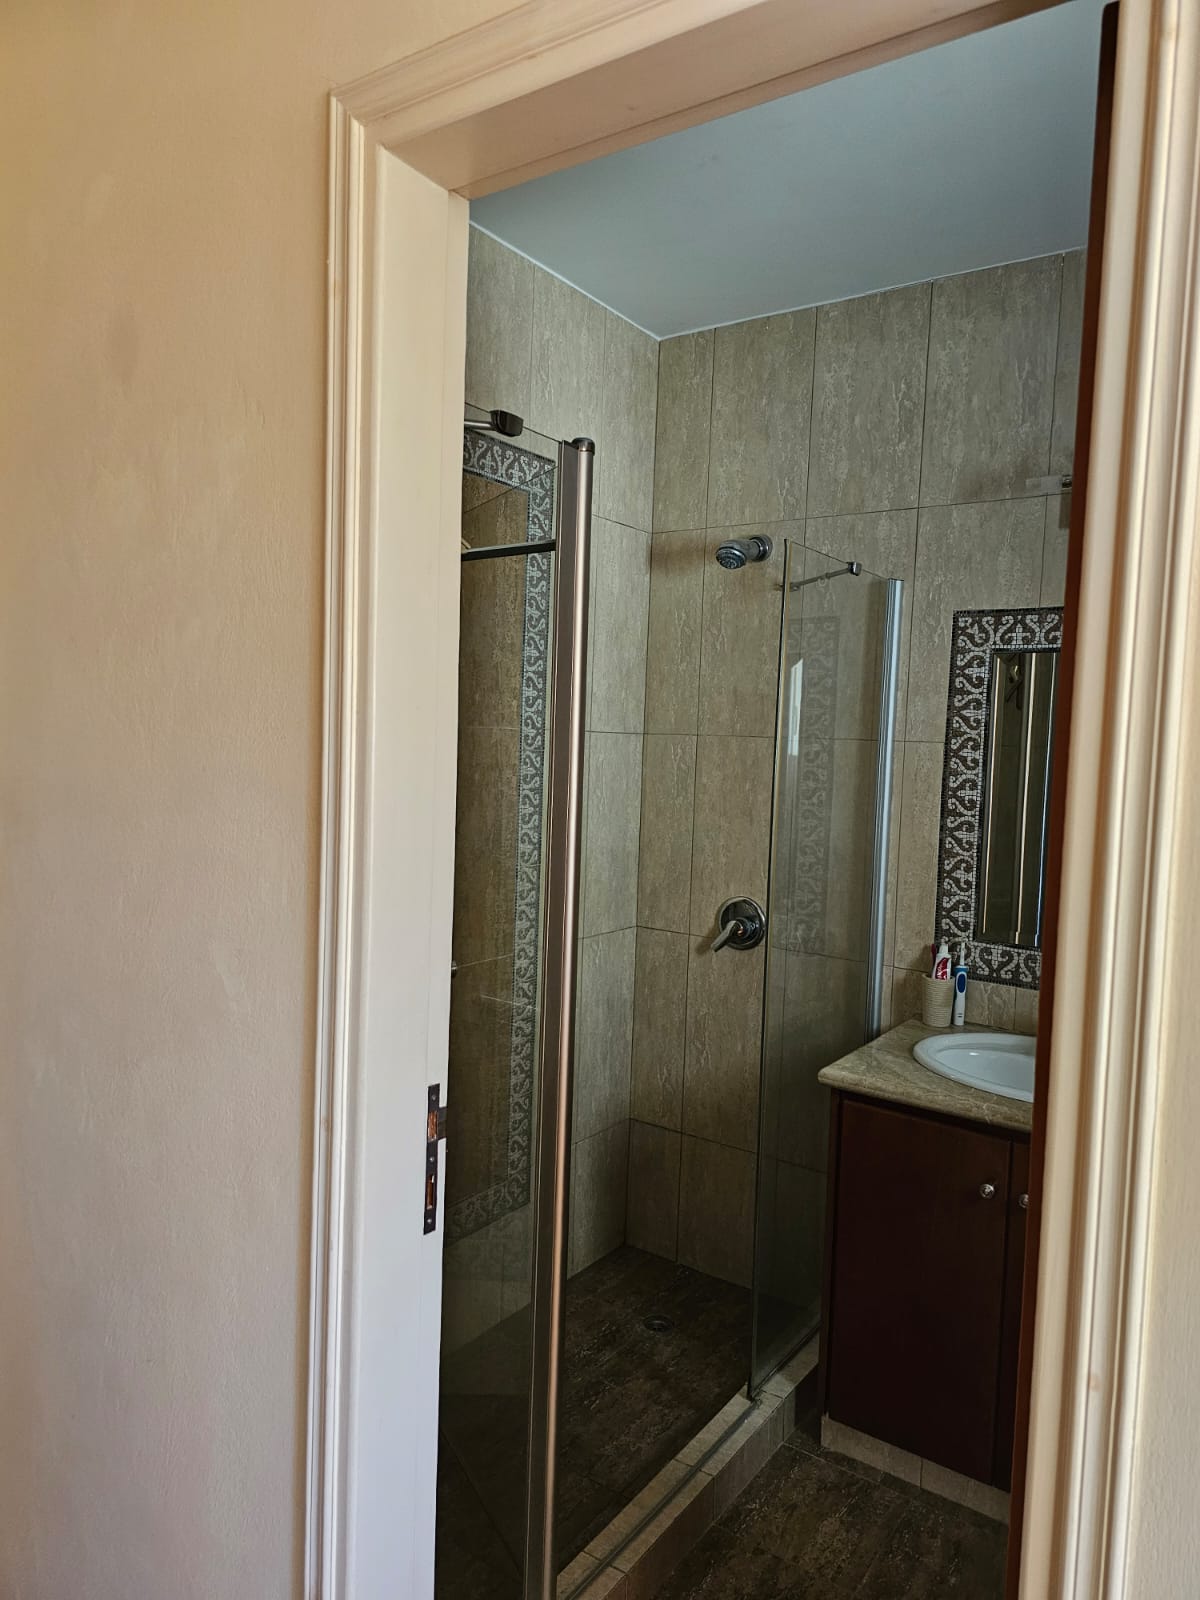 Hauson Realty - Cyprus Real Estate Agents A bathroom with a shower stall and a sink.